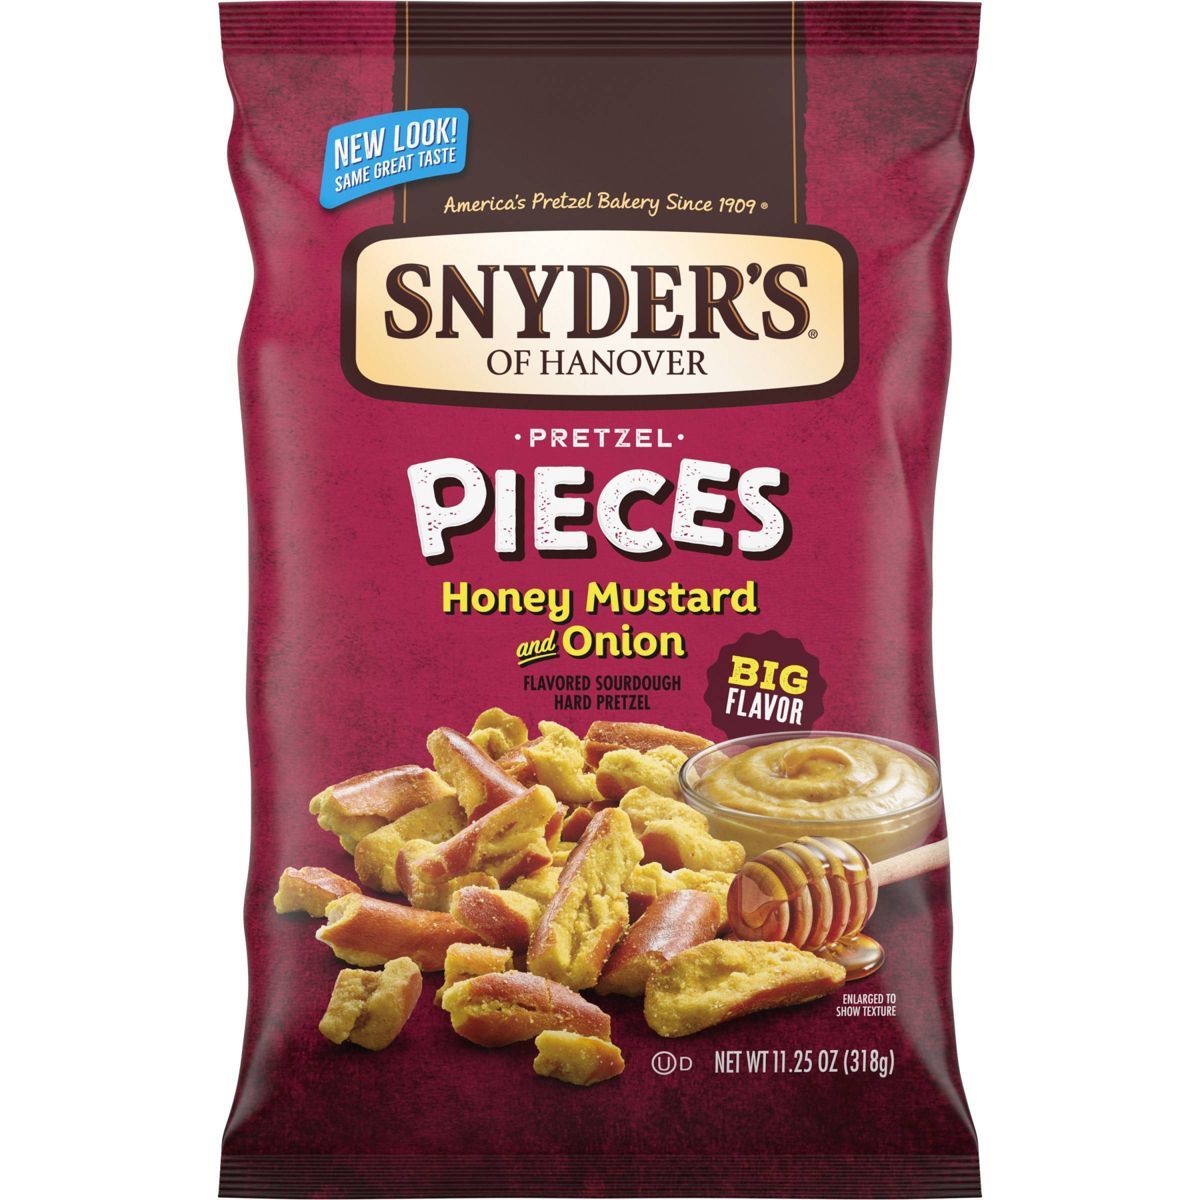 Snyder's of Hanover Pretzel Pieces Honey Mustard and Onion - 11.25oz | Target